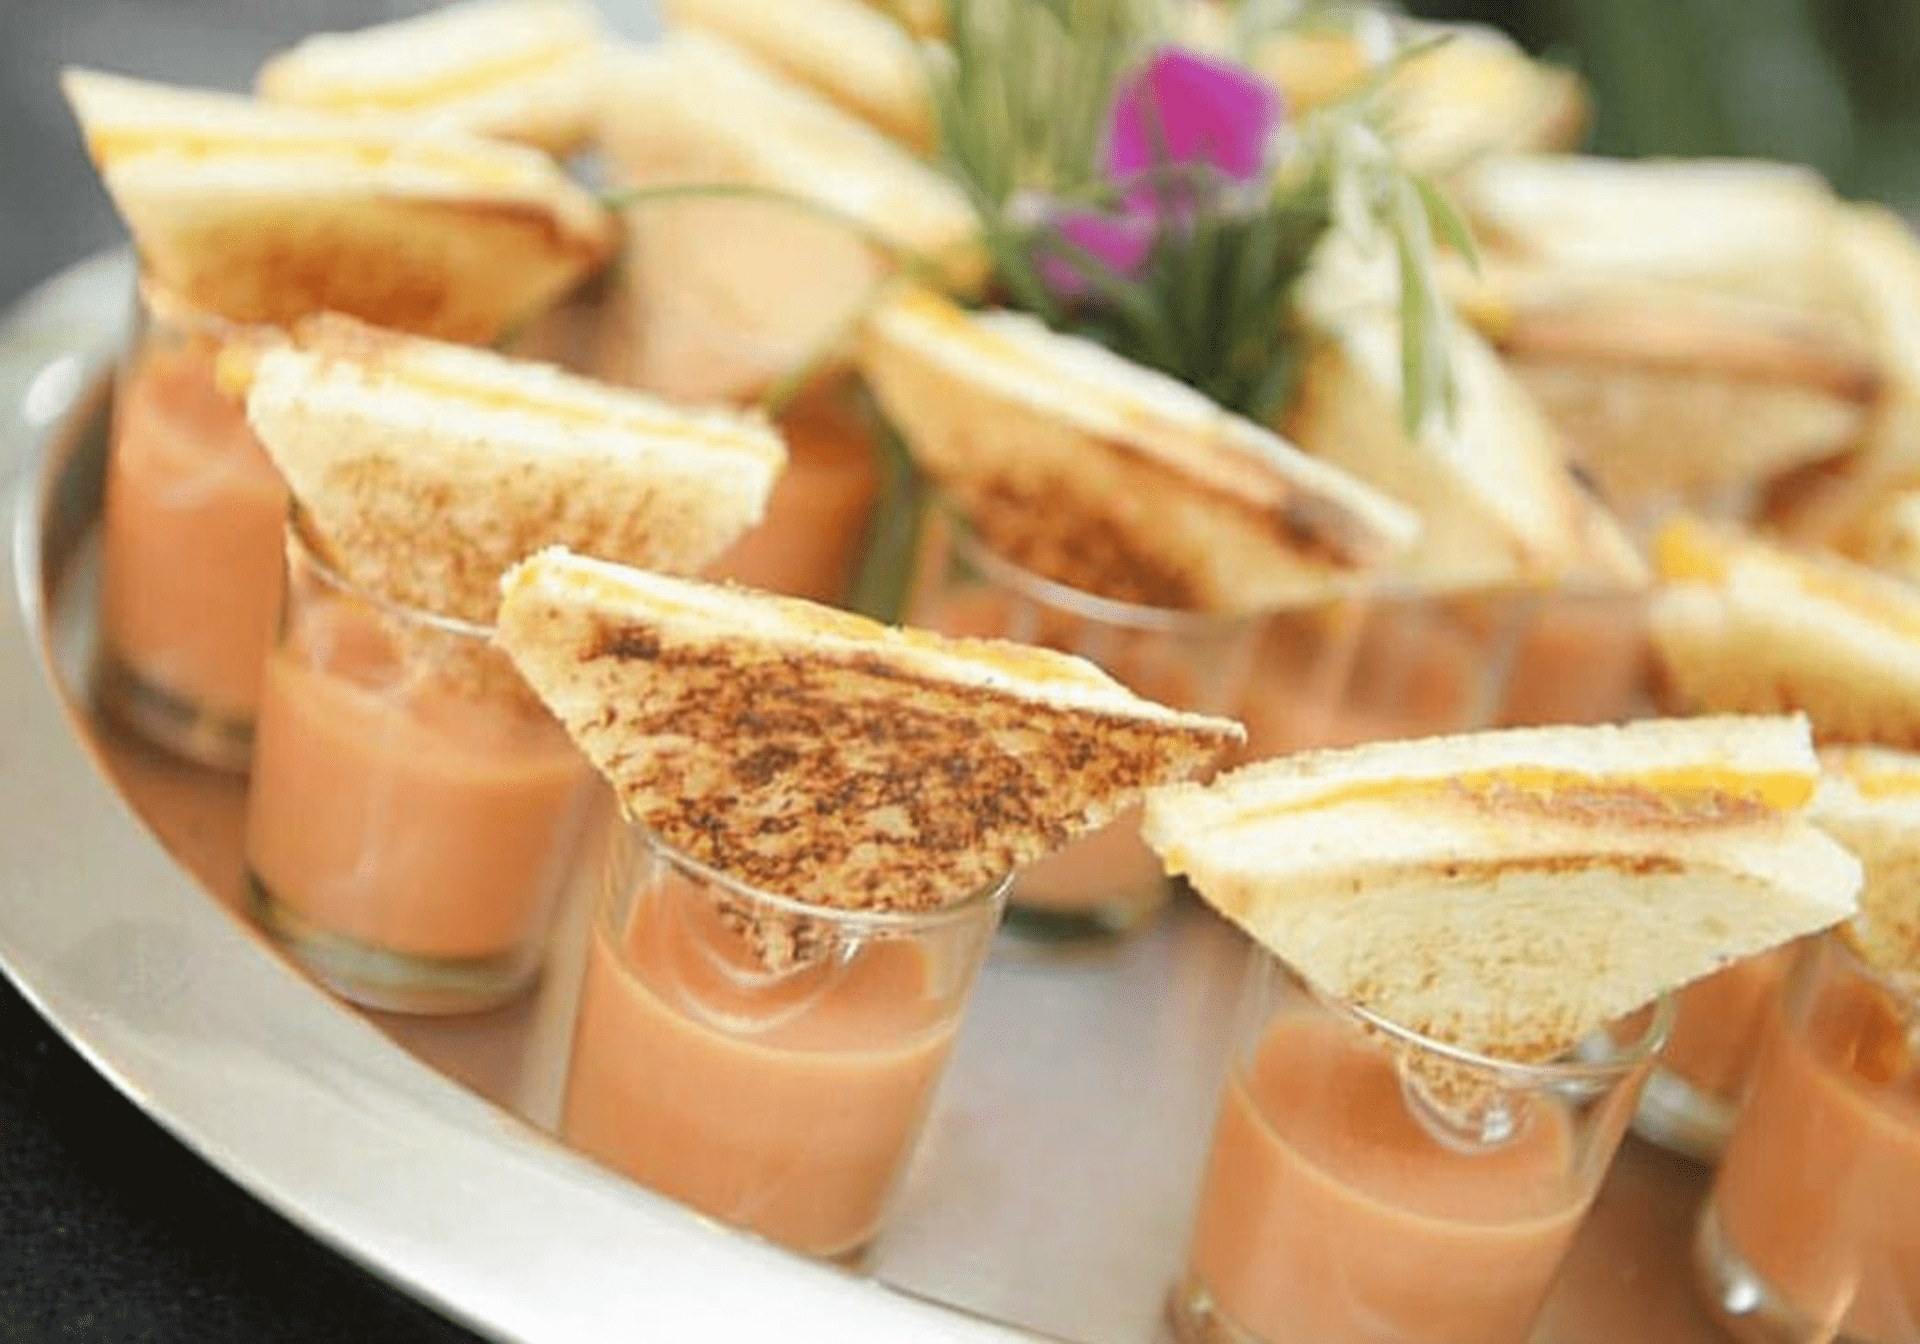 Food Pairing Fun · Merri-Makers Catering and Wedding Planning in New Jersey